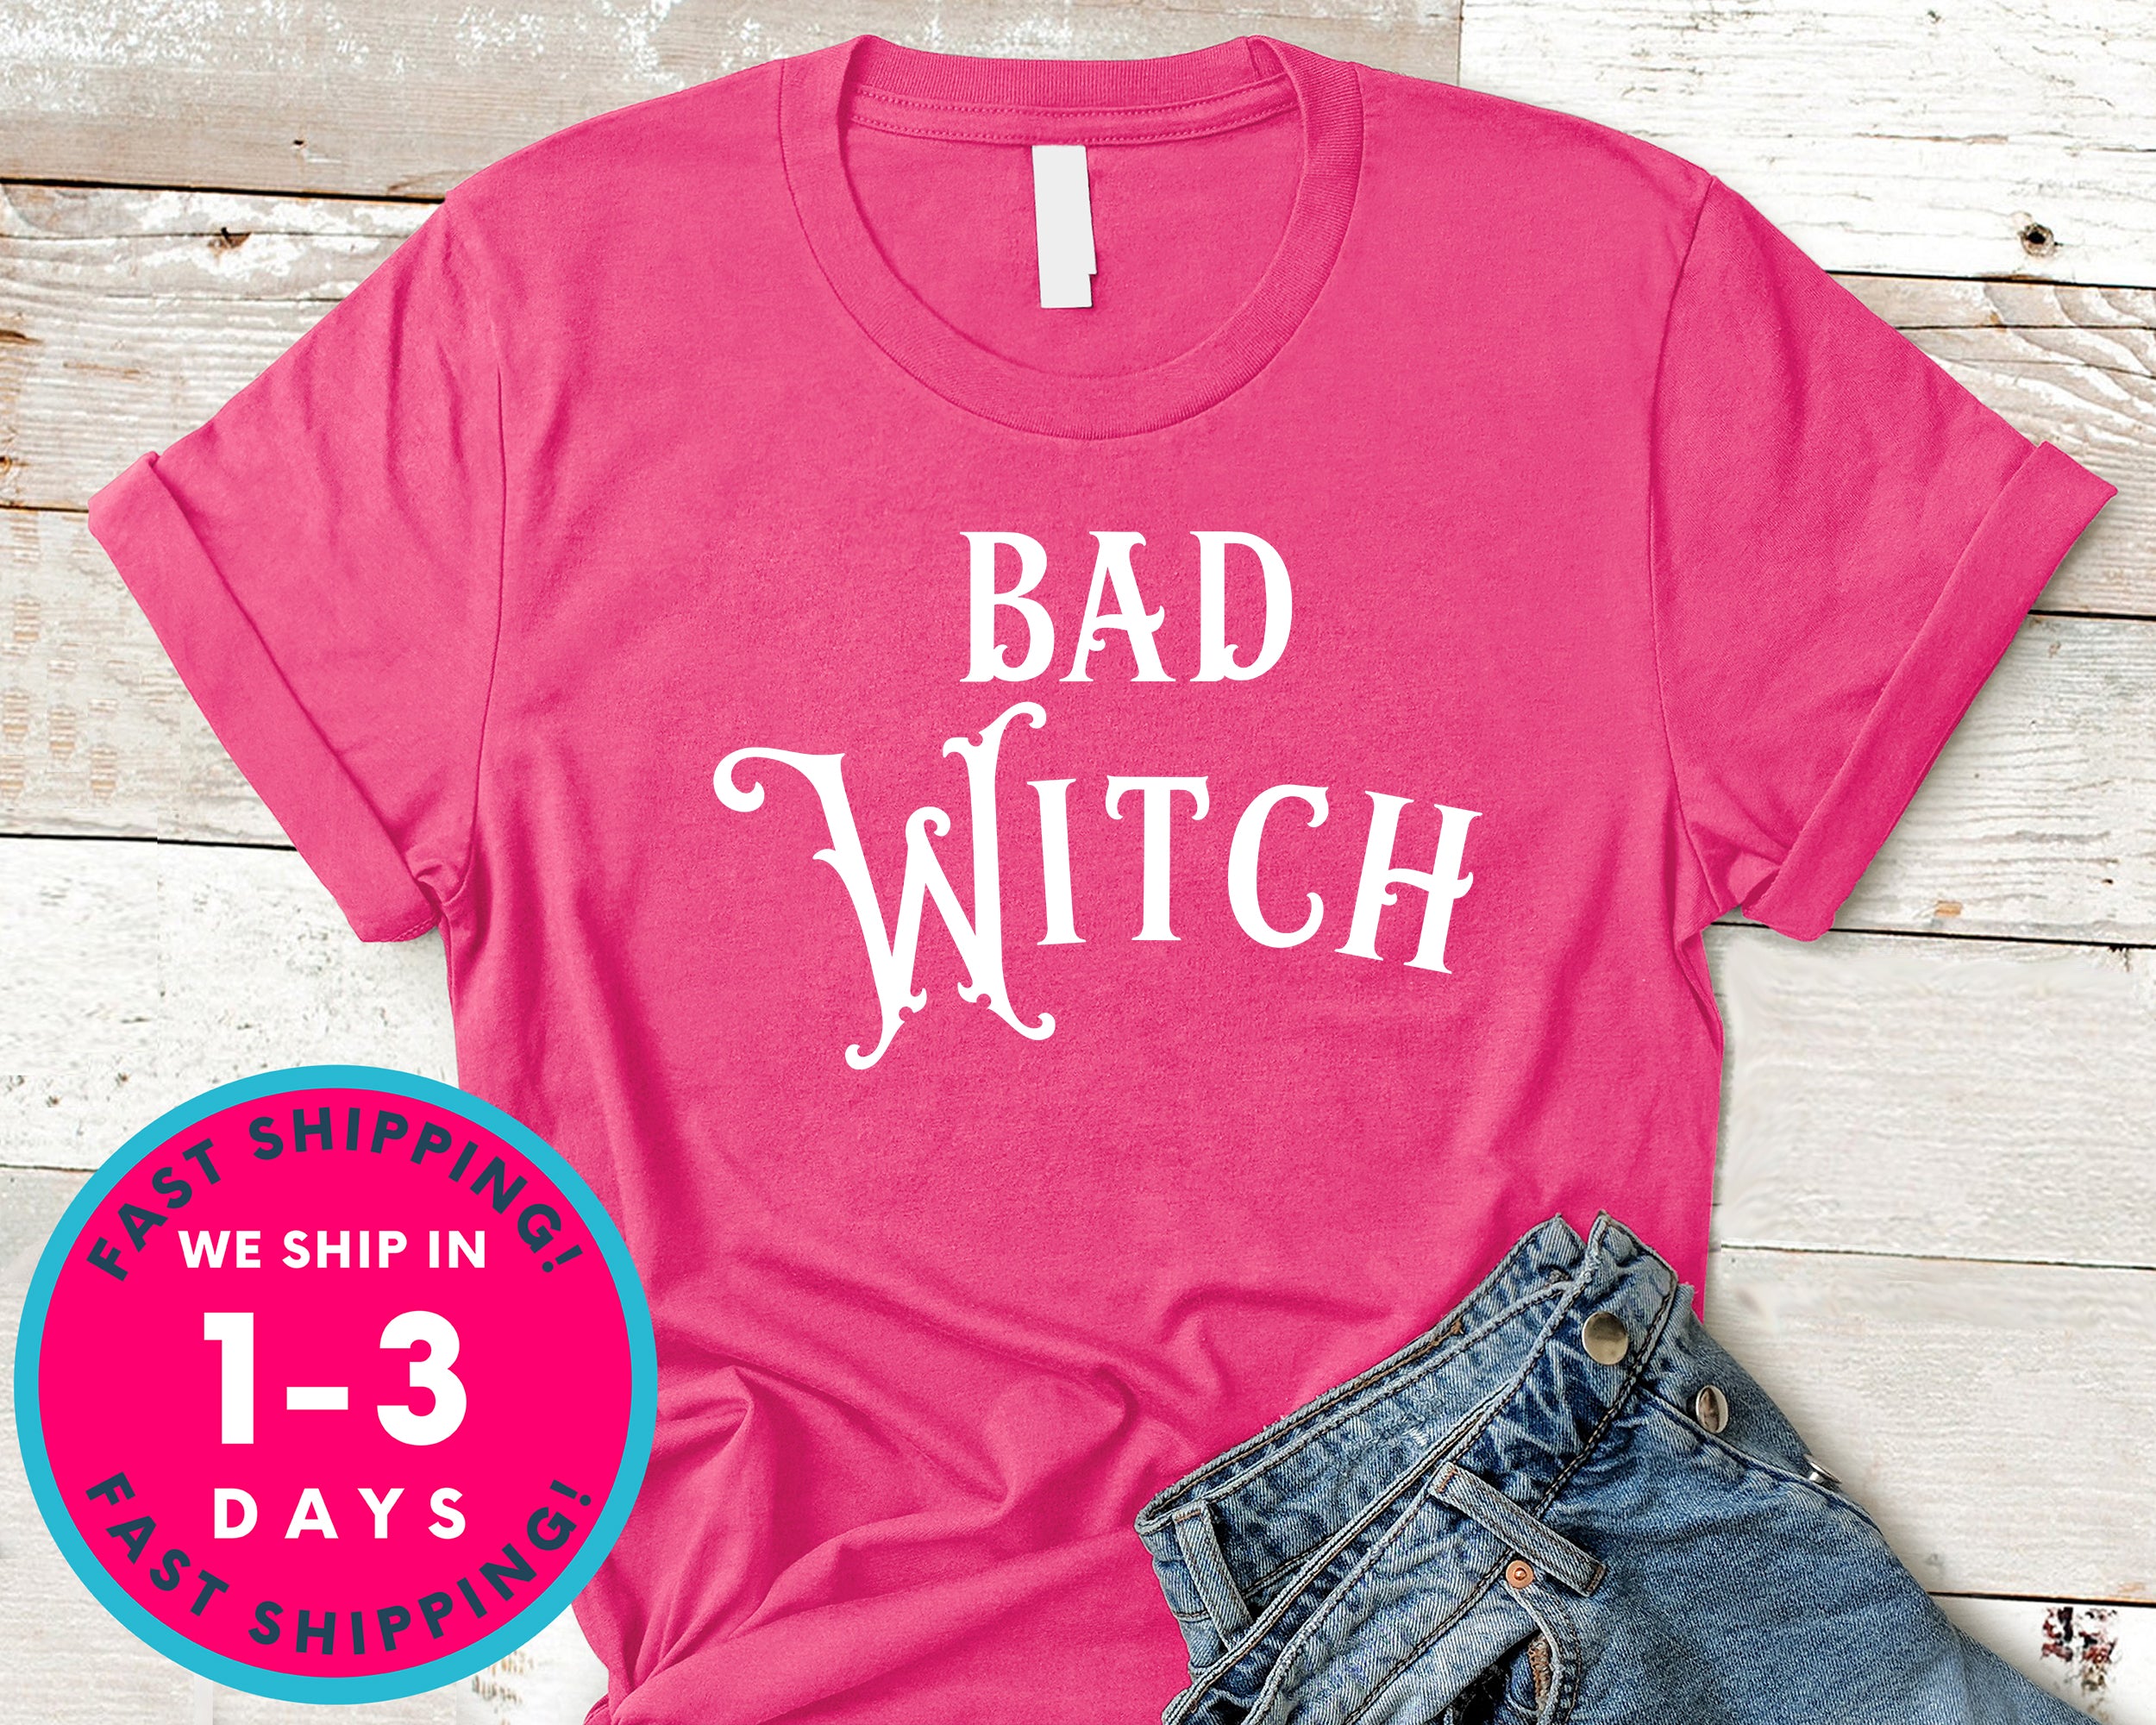 Bad Witch (couple Tee) T-Shirt - Halloween Horror Scary Shirt